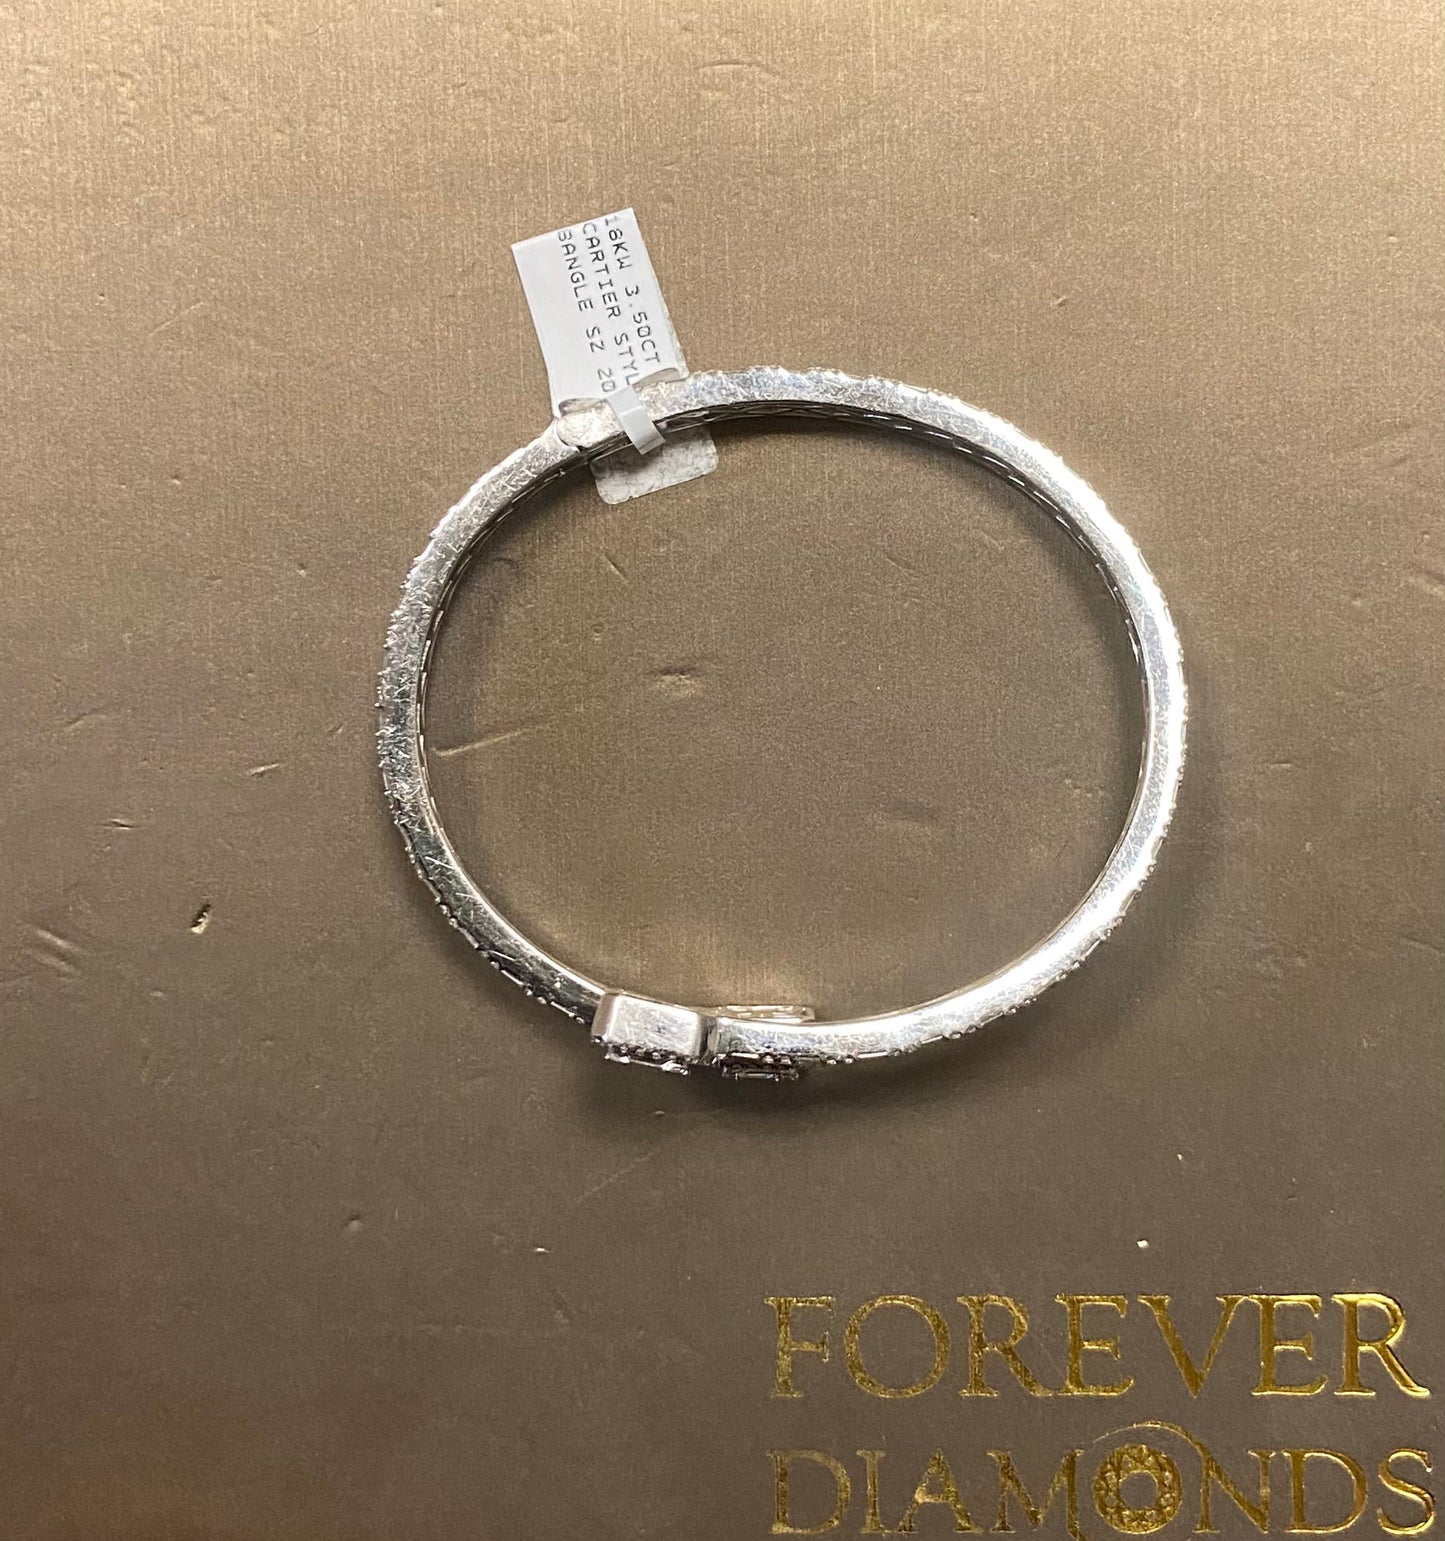 18K White Gold 3.50CT Cartier Style Bangle